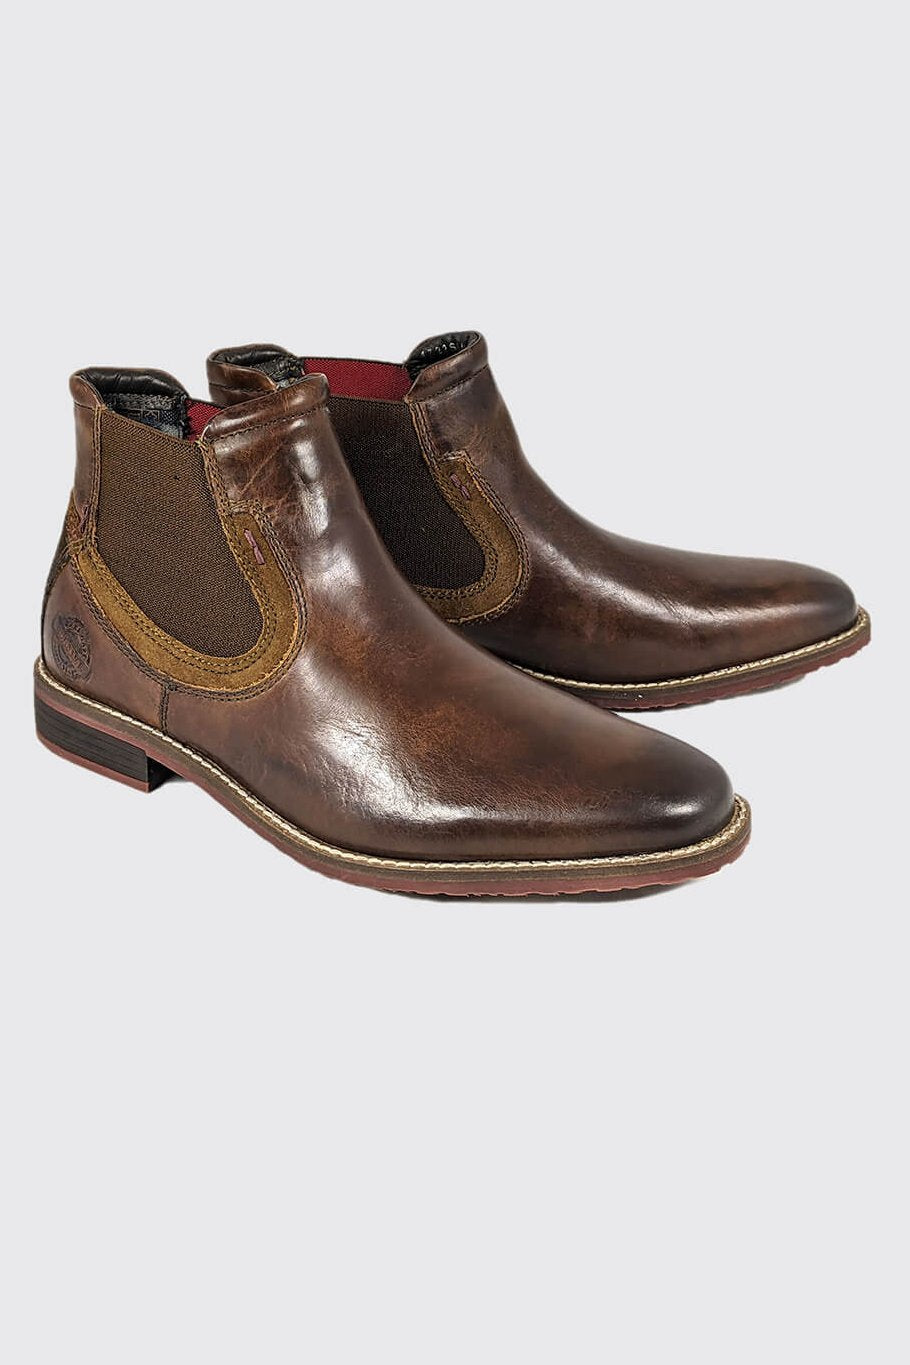 Men's Santos Tan Boot-Side View of Both Boots